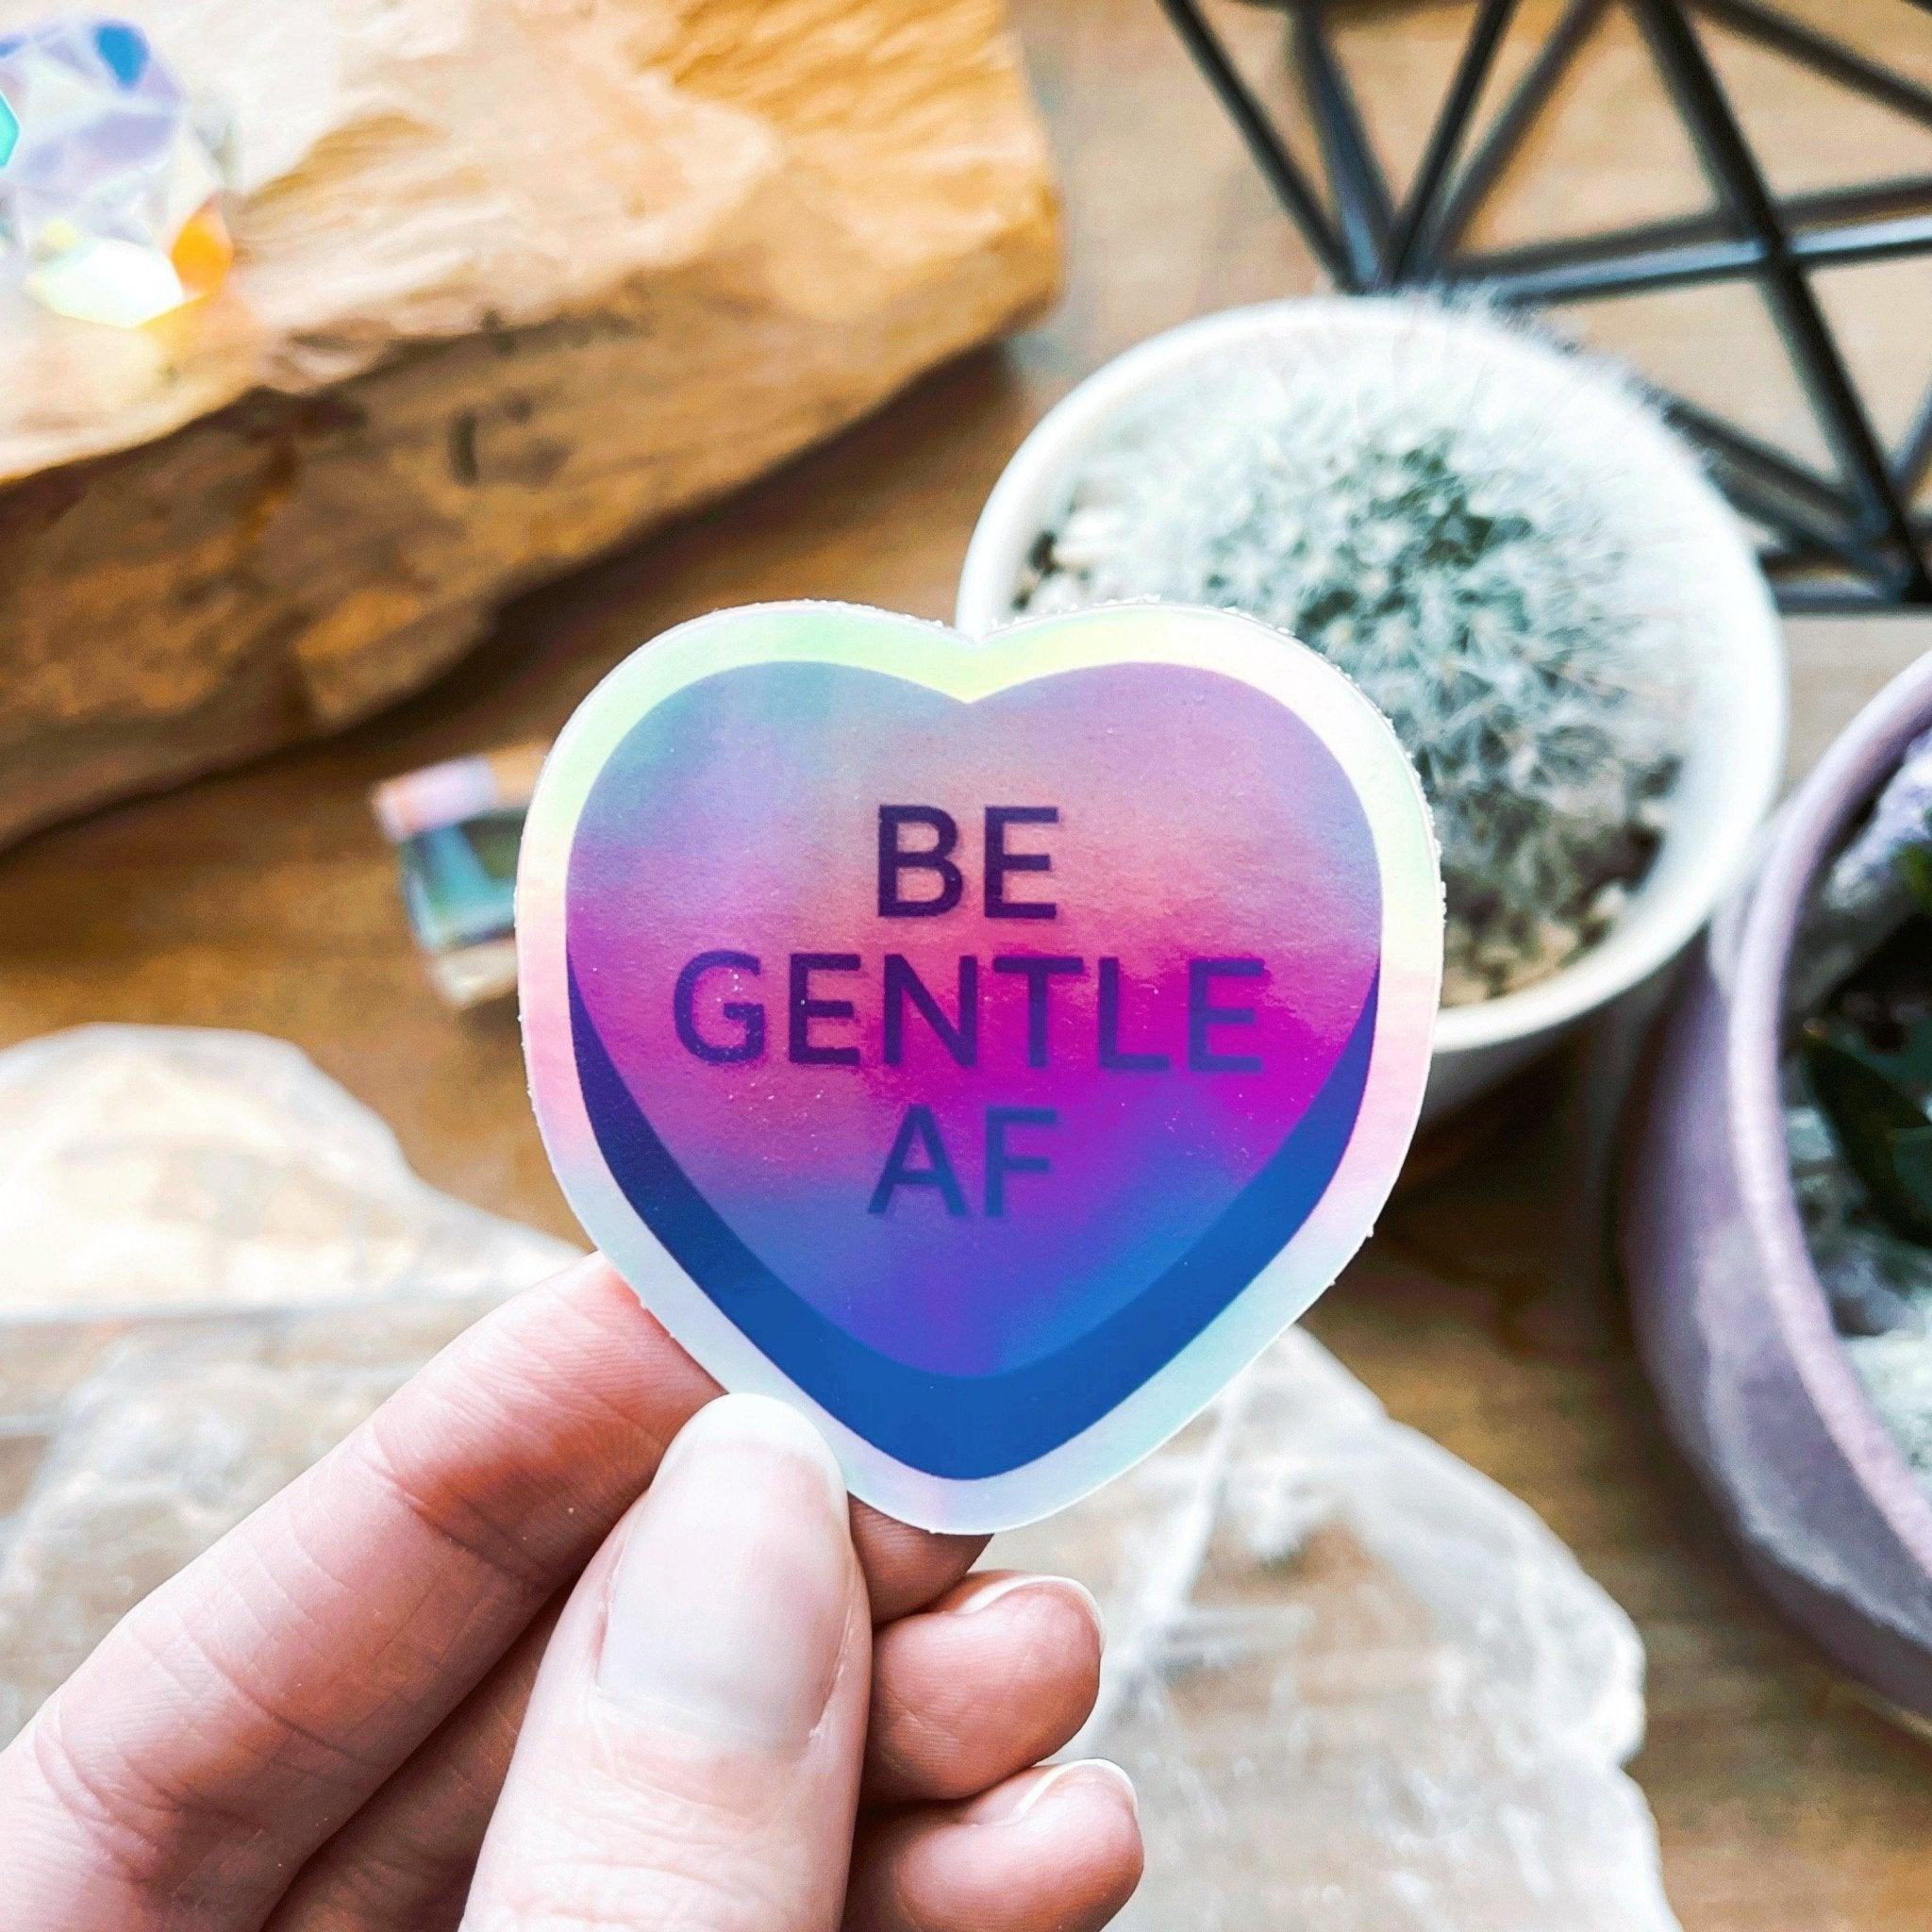 "BE GENTLE AF" HEART STICKER - be gentle, energy tool, sticker - The Mineral Maven